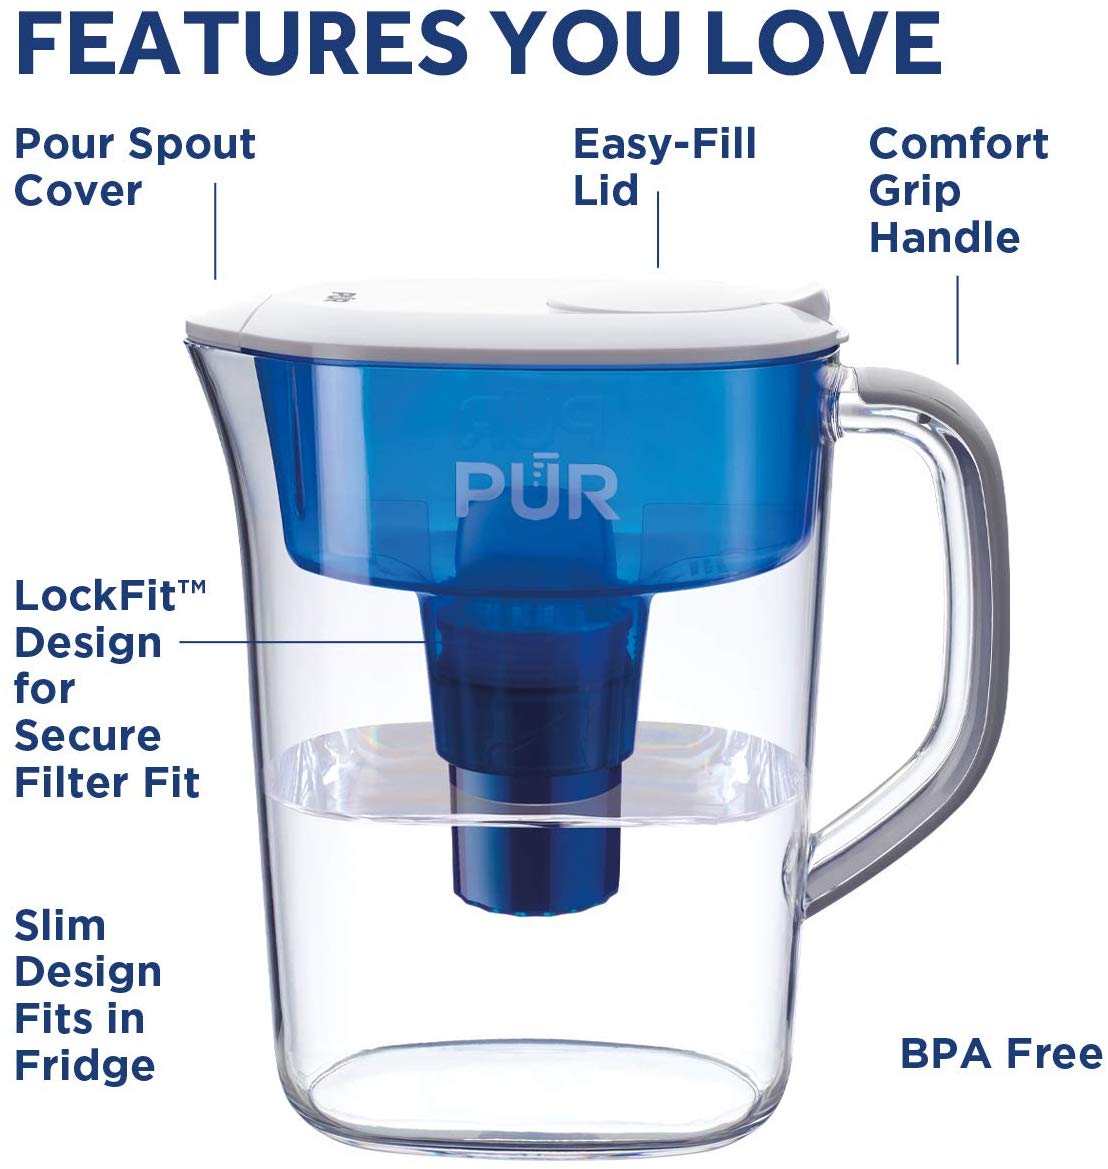 PUR 7 Cup Pitcher Filtration System, PPT700W, Blue/White - image 3 of 13